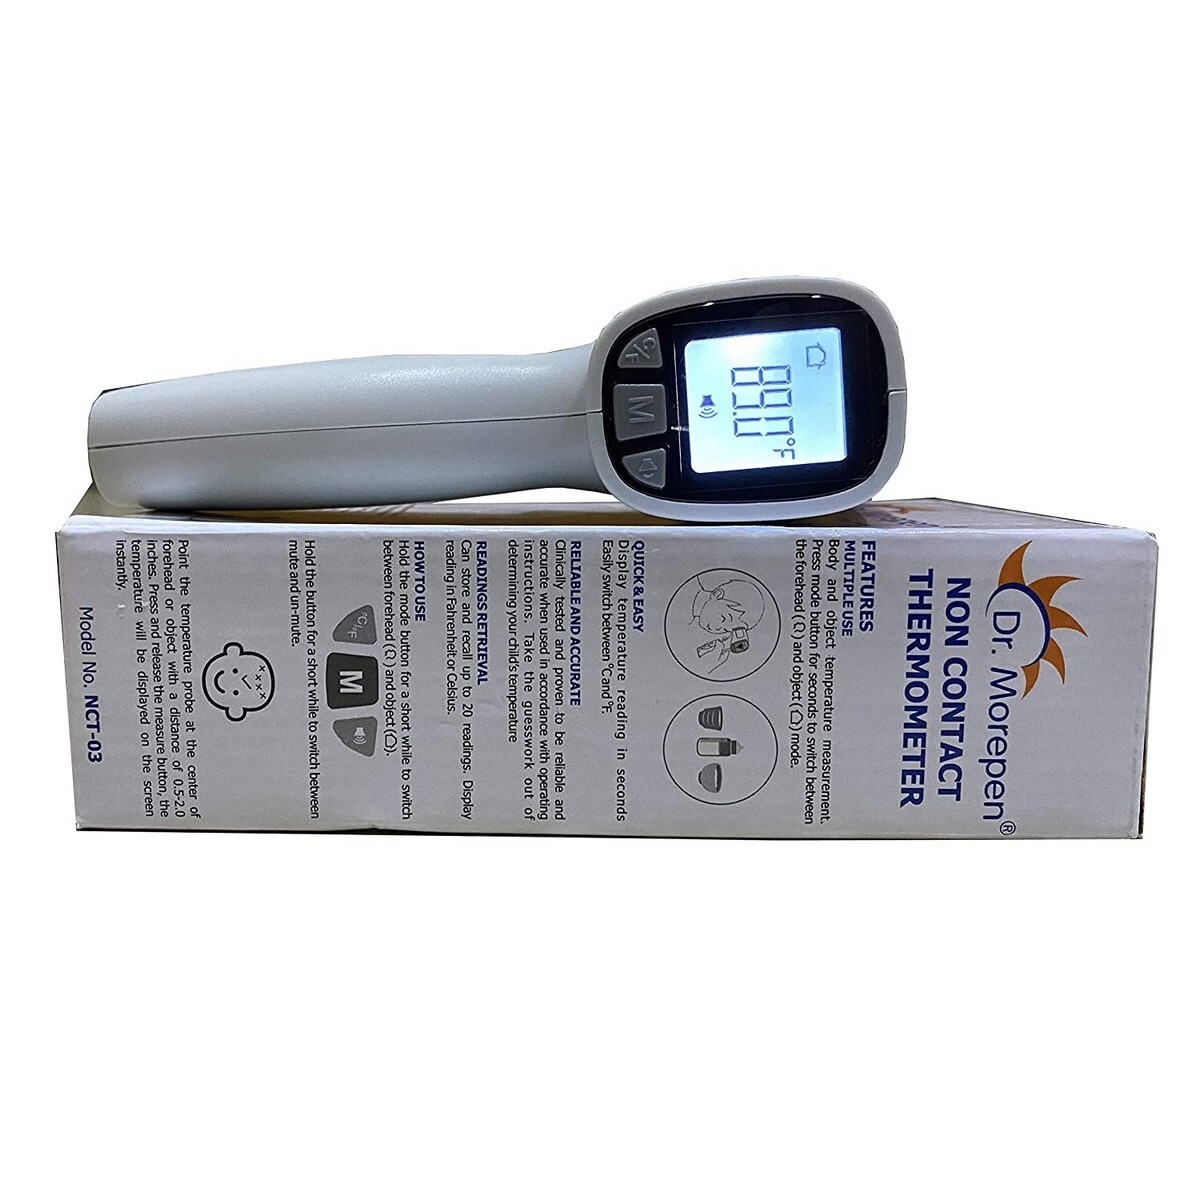 Dr. Morepen Non-Contact Thermometer